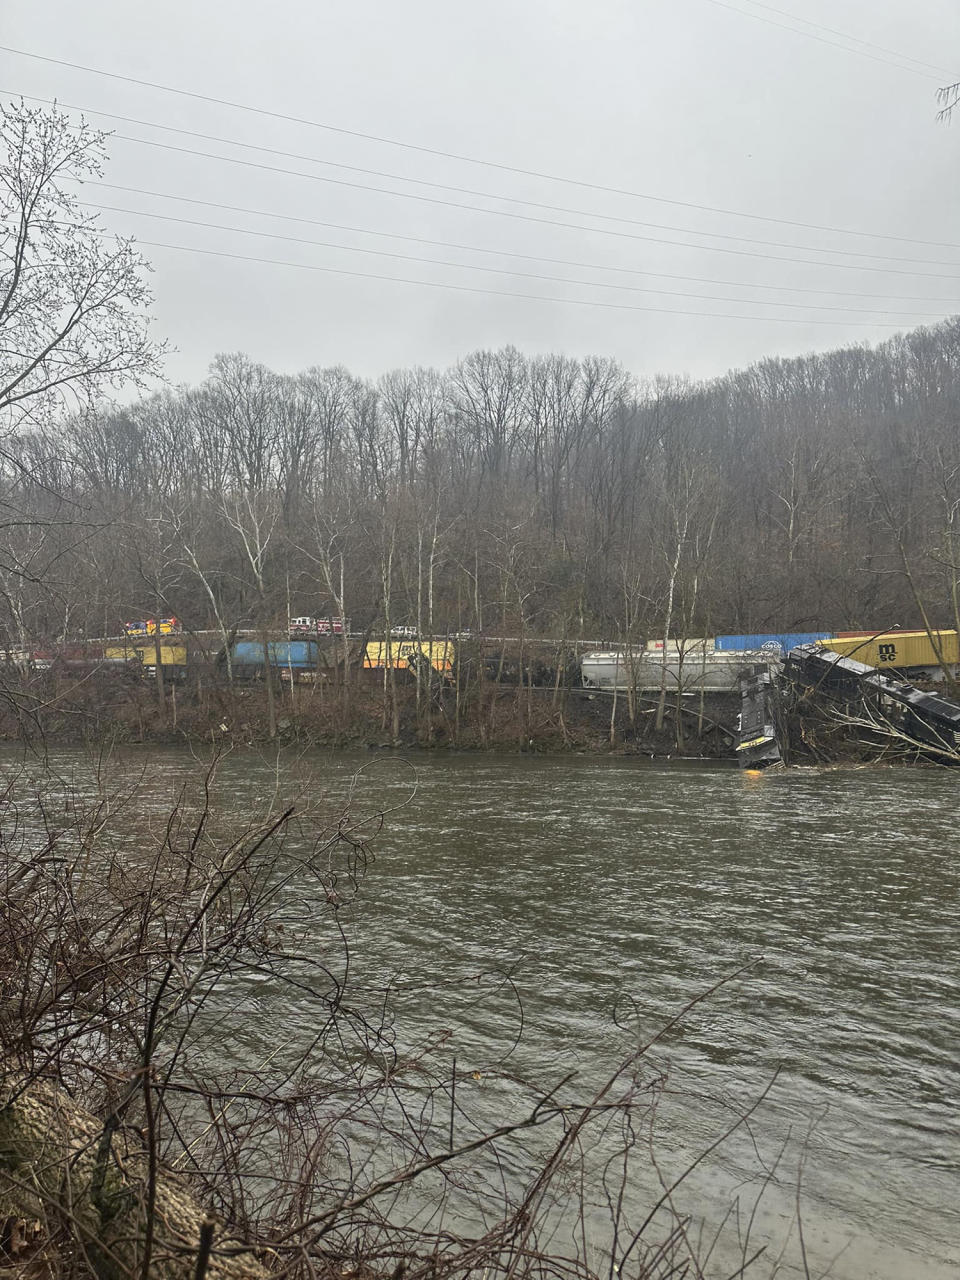 This photo provided by Nancy Run Fire Company shows a train derailment along a riverbank in Saucon Township, Pa., on Saturday, March 2, 2024. Authorities said it was unclear how many cars were involved but no injuries or hazardous materials were reported. (Nancy Run Fire Company via AP)